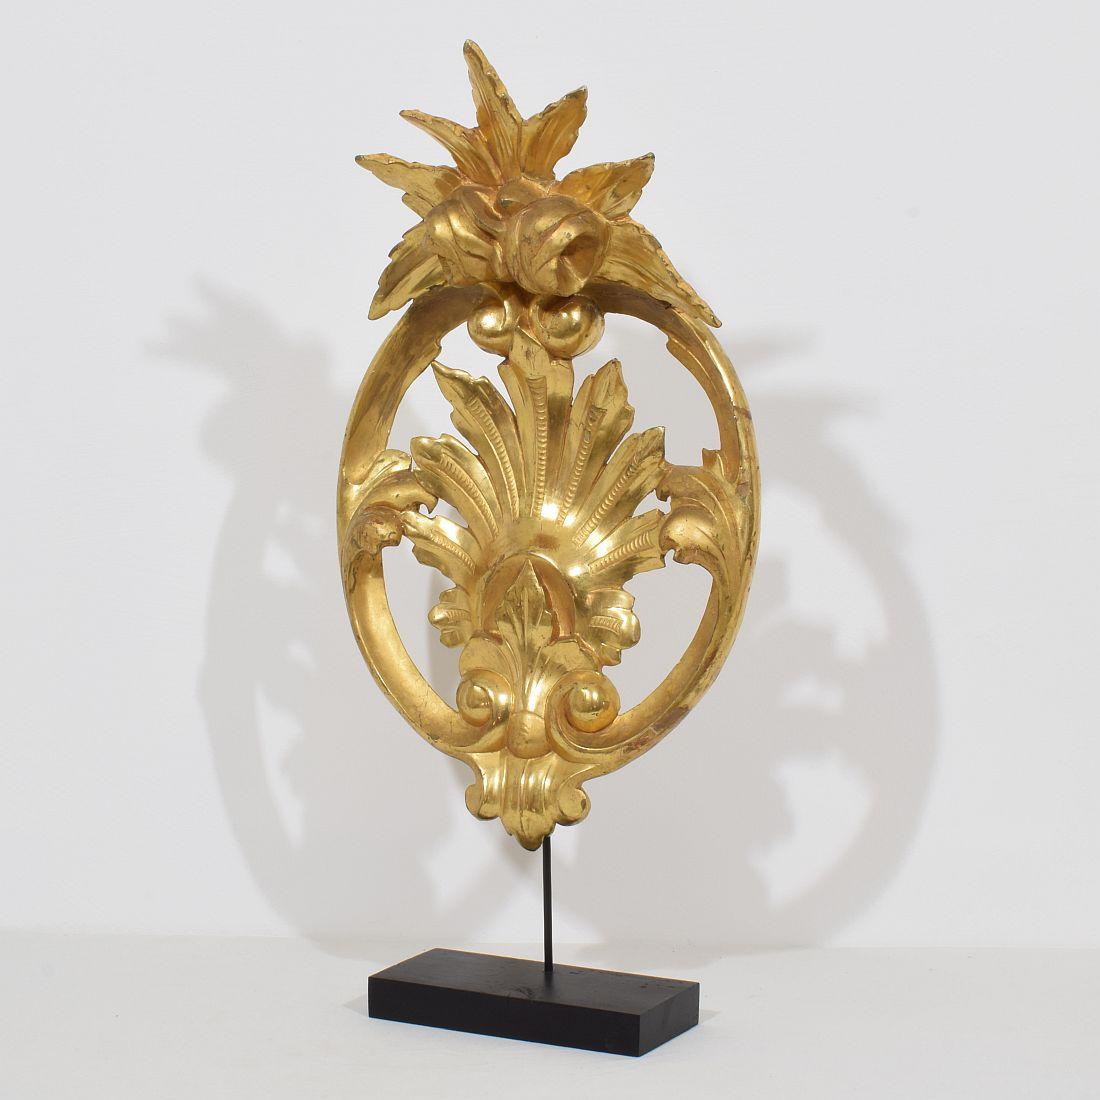 Beautiful and large carved giltwood ornament Italy, circa 1850.
Weathered and old repairs
Measurements include the wooden base.